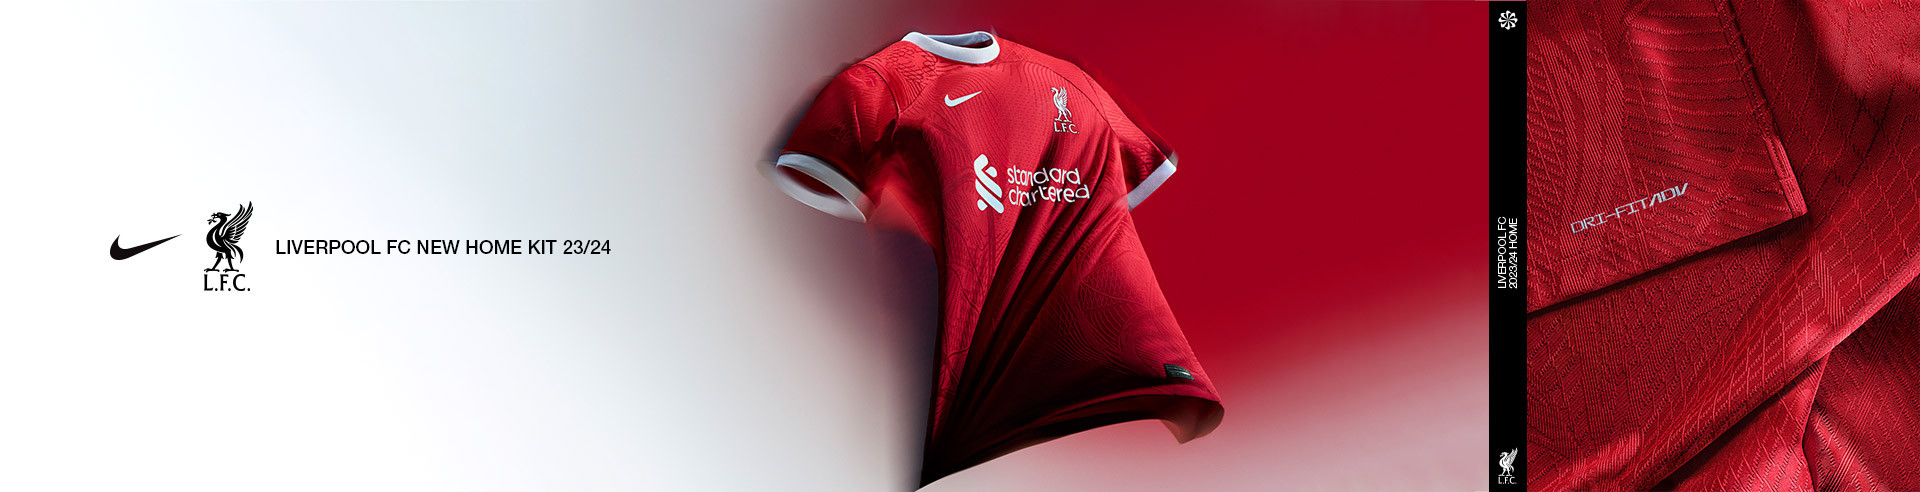 Nike Liverpool New Home Kit 23/24 ALL